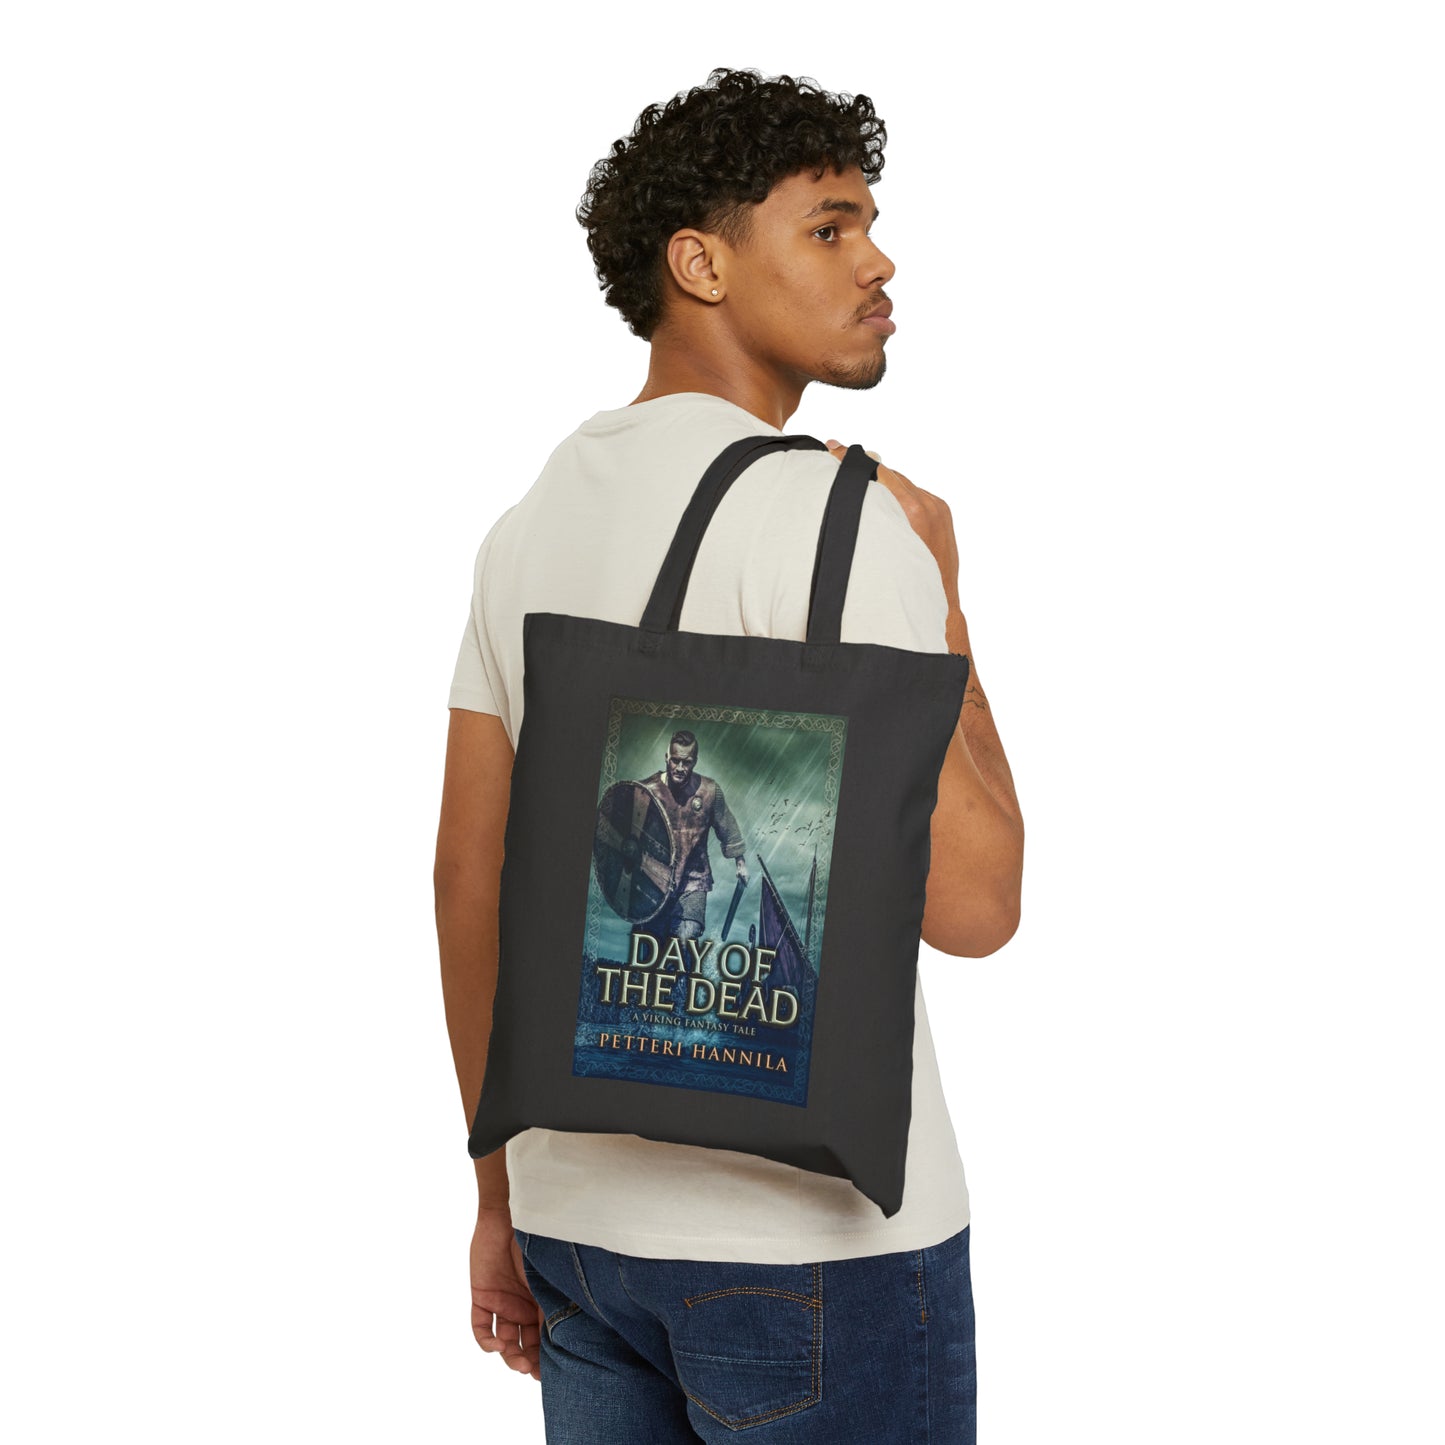 Day of the Dead - Cotton Canvas Tote Bag